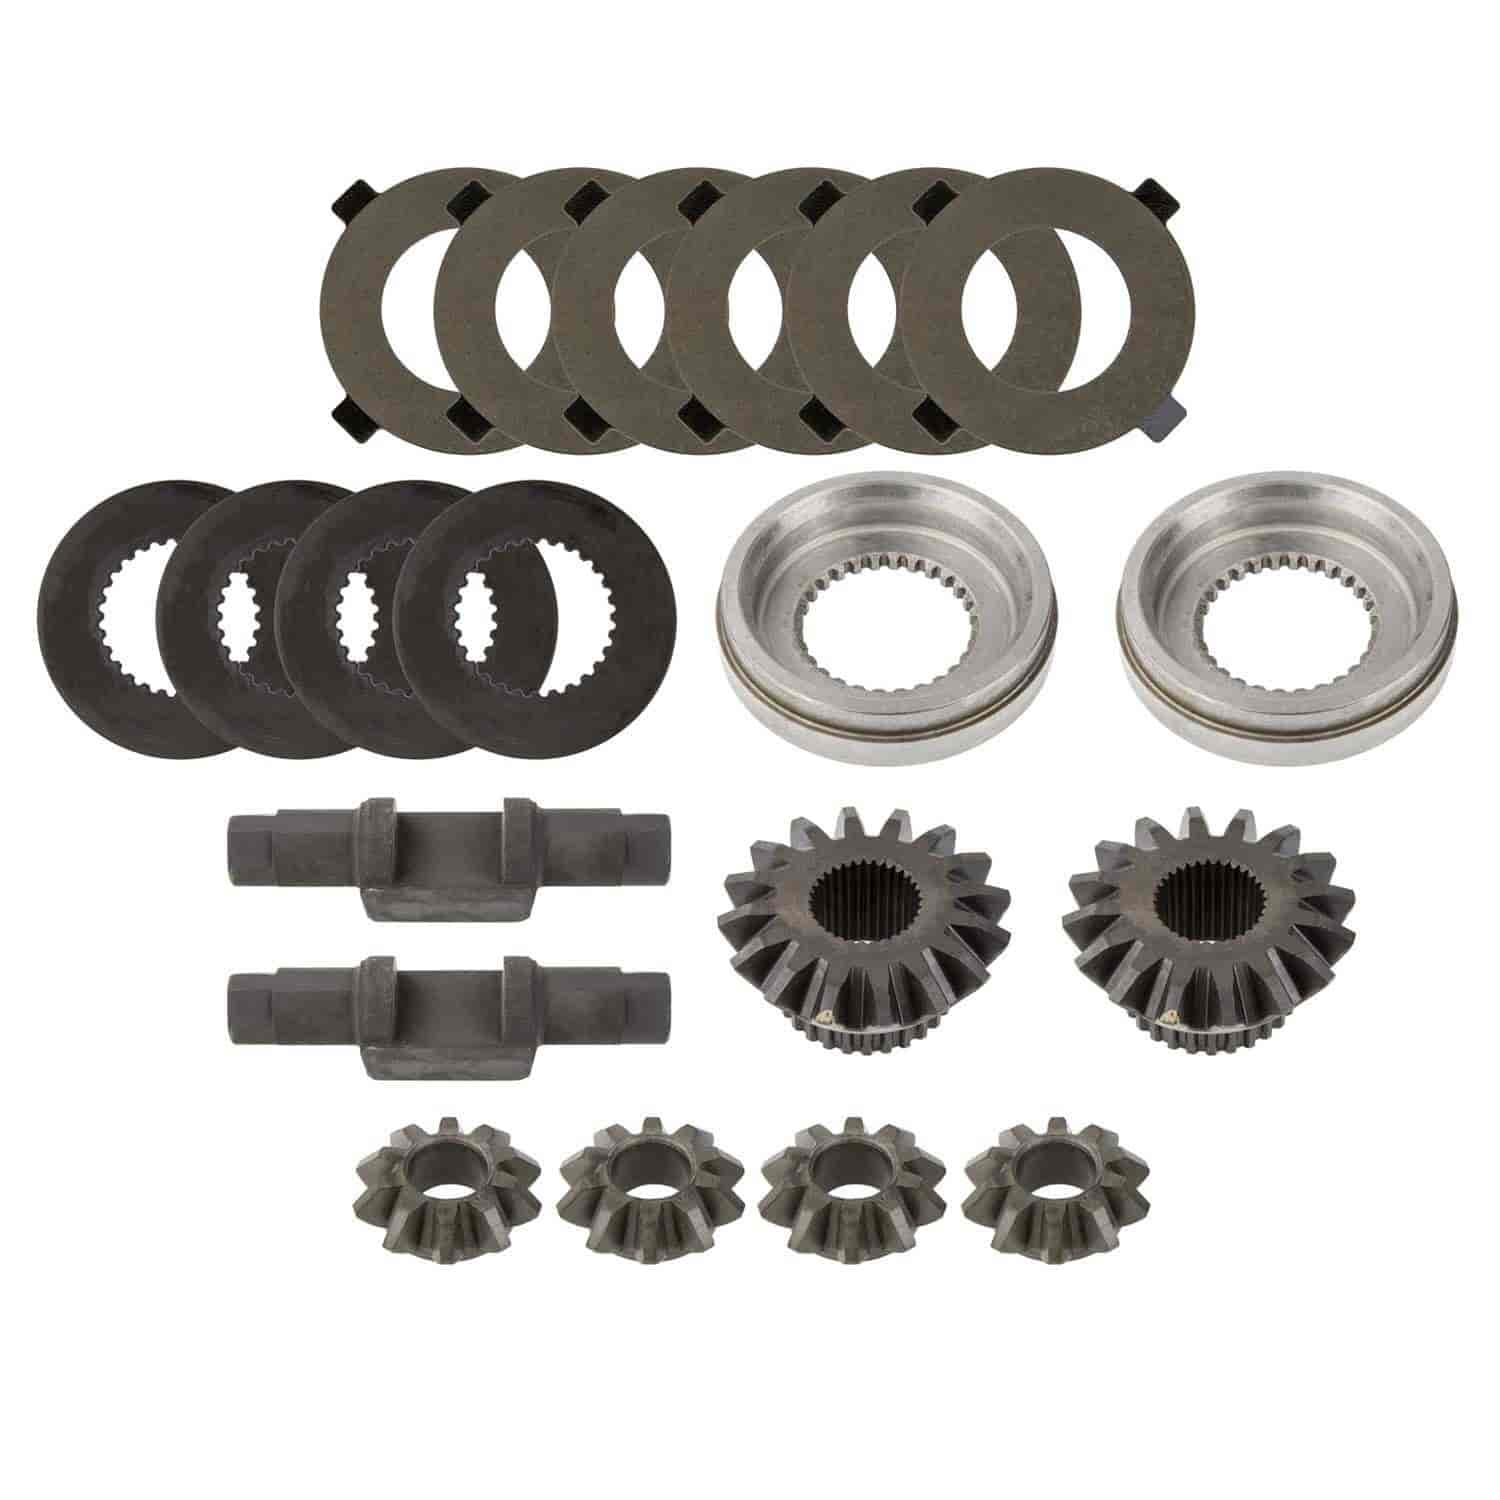 DIFFERENTIAL PARTS KIT